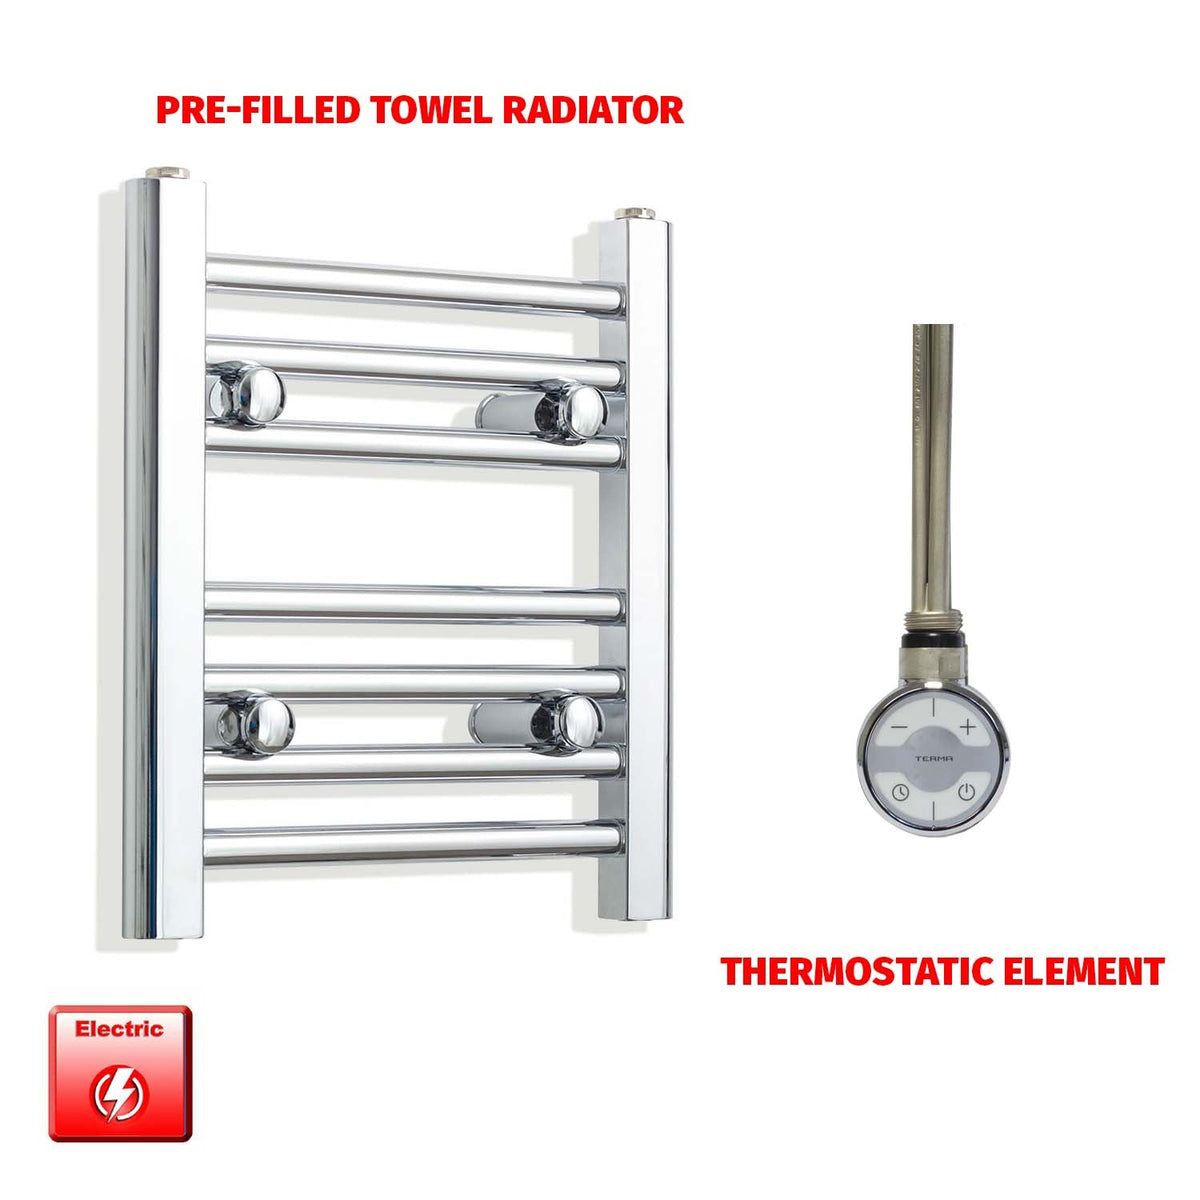 400mm High 350mm Wid Pre-Filled Electric Heated Towel Rail Radiator Straight Chrome MOA Thermostatic element no timer